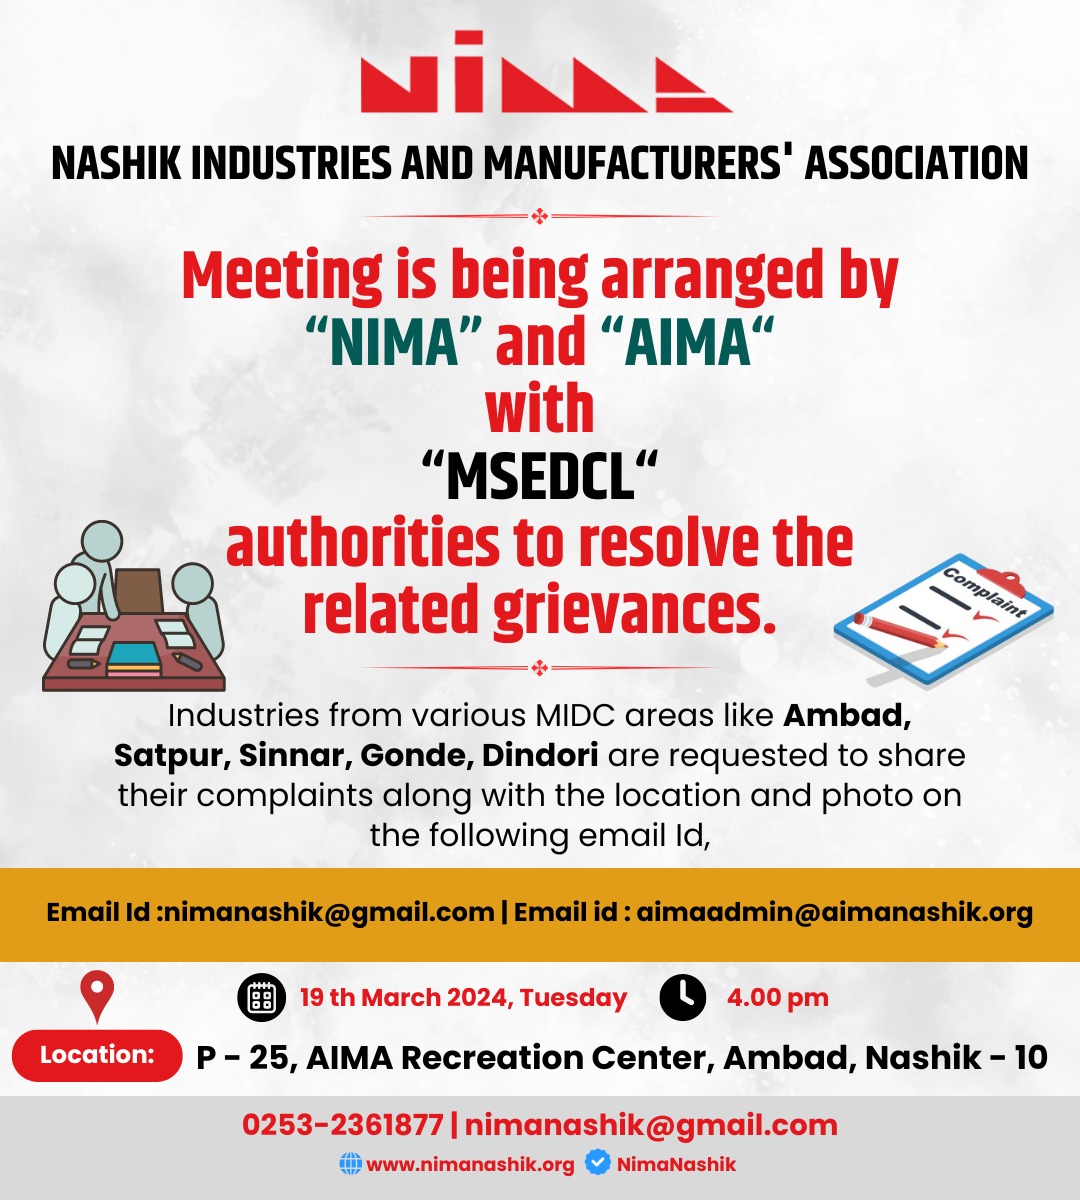 A meeting is being arranged by Nashik Industries & Manufacturers' Association “NIMA” and AIMA with MSEDCL authorities to resolve the related grievances. #nima #nimanashik #MSEDL